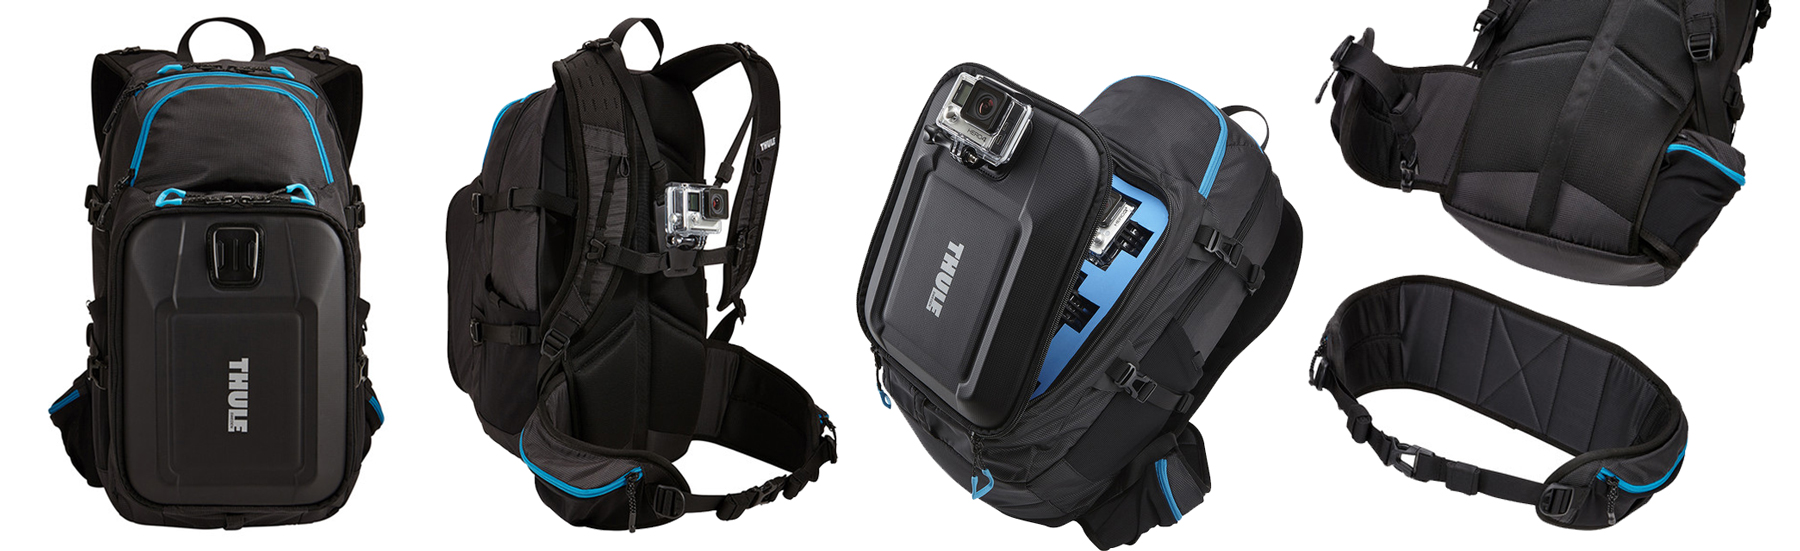 Thule Legend GoPro Backpack Review